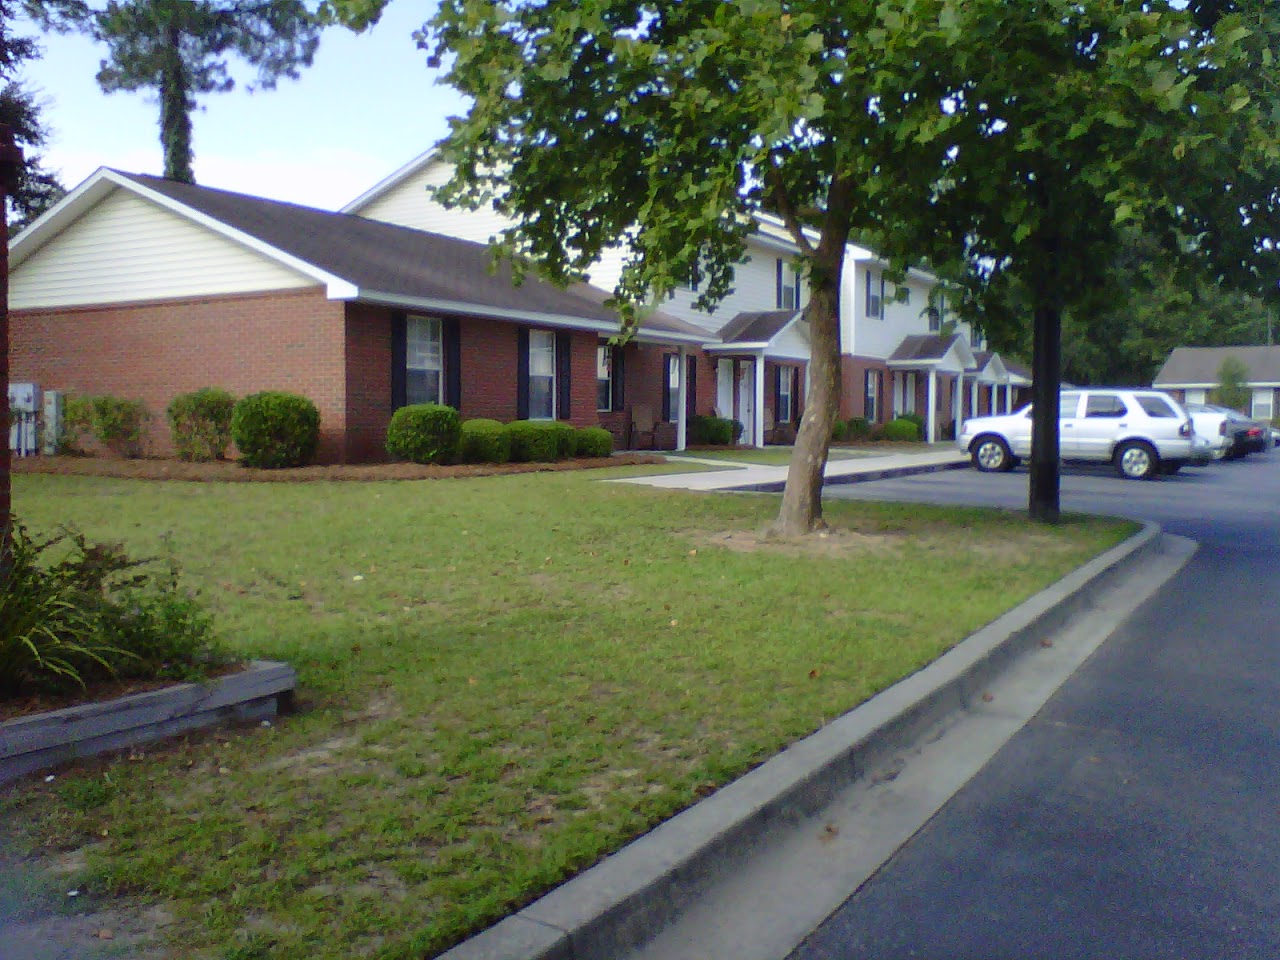 Photo of ARBOR TRACE PHASE II. Affordable housing located at 4700 ROLLING PINE DR STE 43 LAKE PARK, GA 31636